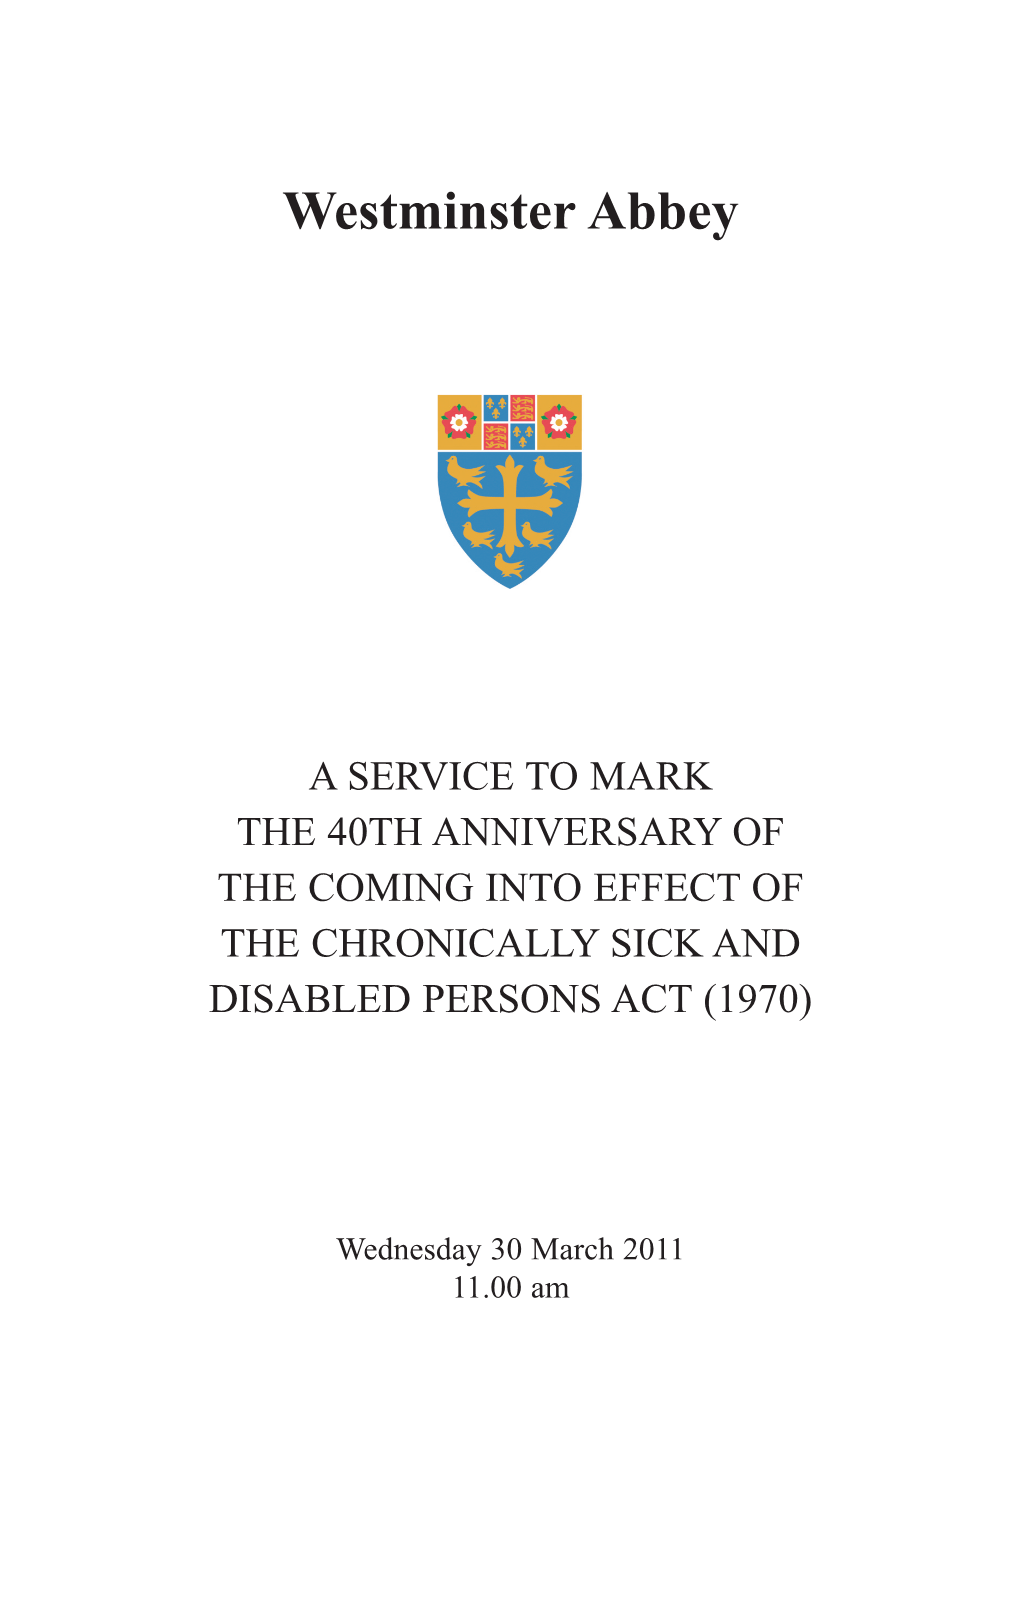 Chronically-Sick-Disabled-Persons-Act-Service.Pdf